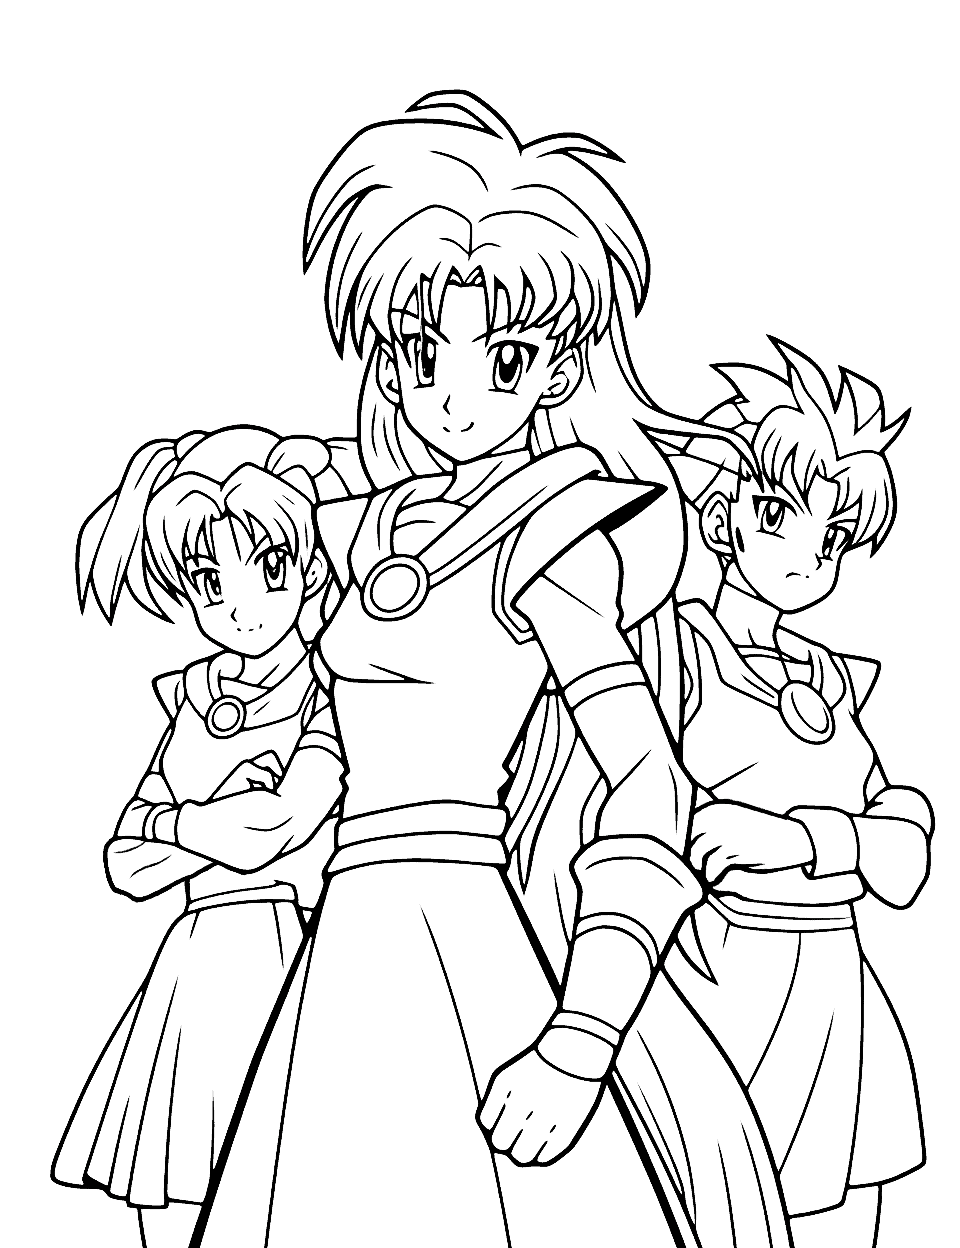 Sailor Moon Team Anime Coloring Page - A coloring page featuring the main characters from Sailor Moon, perfect for fans of the series.